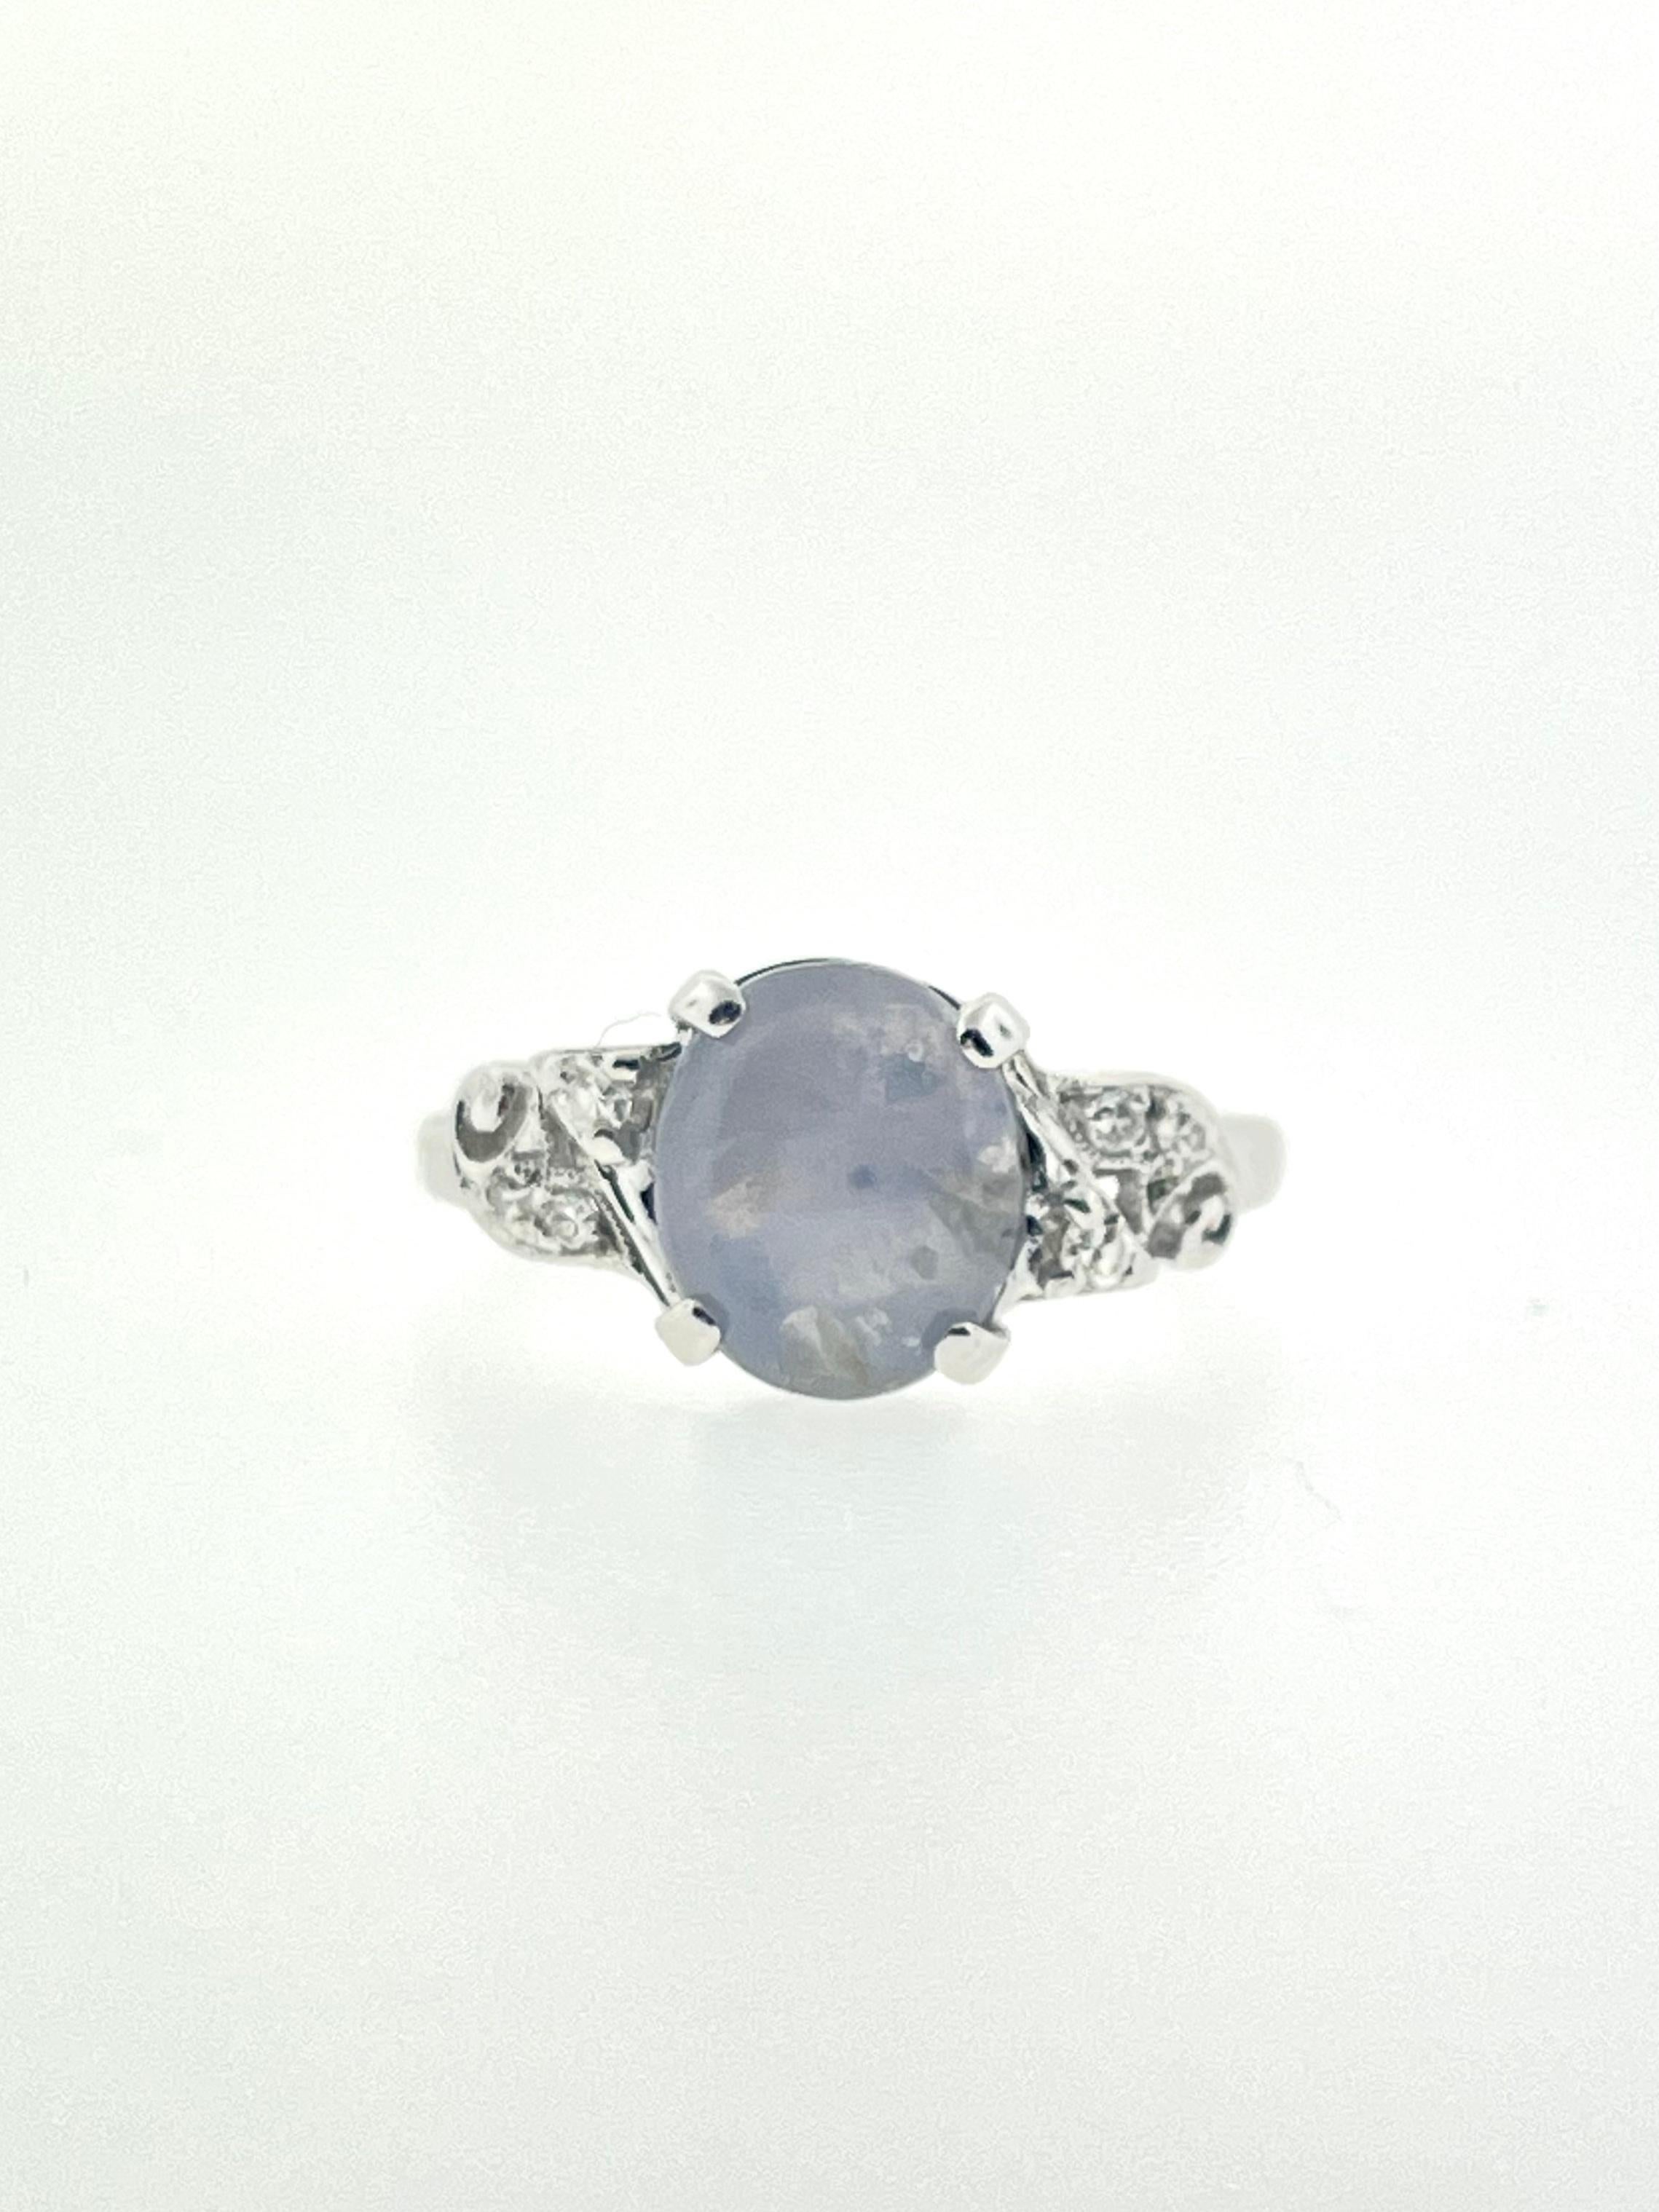 A beautiful star sapphire straight from the ground! This bright star sapphire is surrounded by three round diamonds on each side all set in white gold, this one is for you! 

*center stone has slight inclusion on the side* 